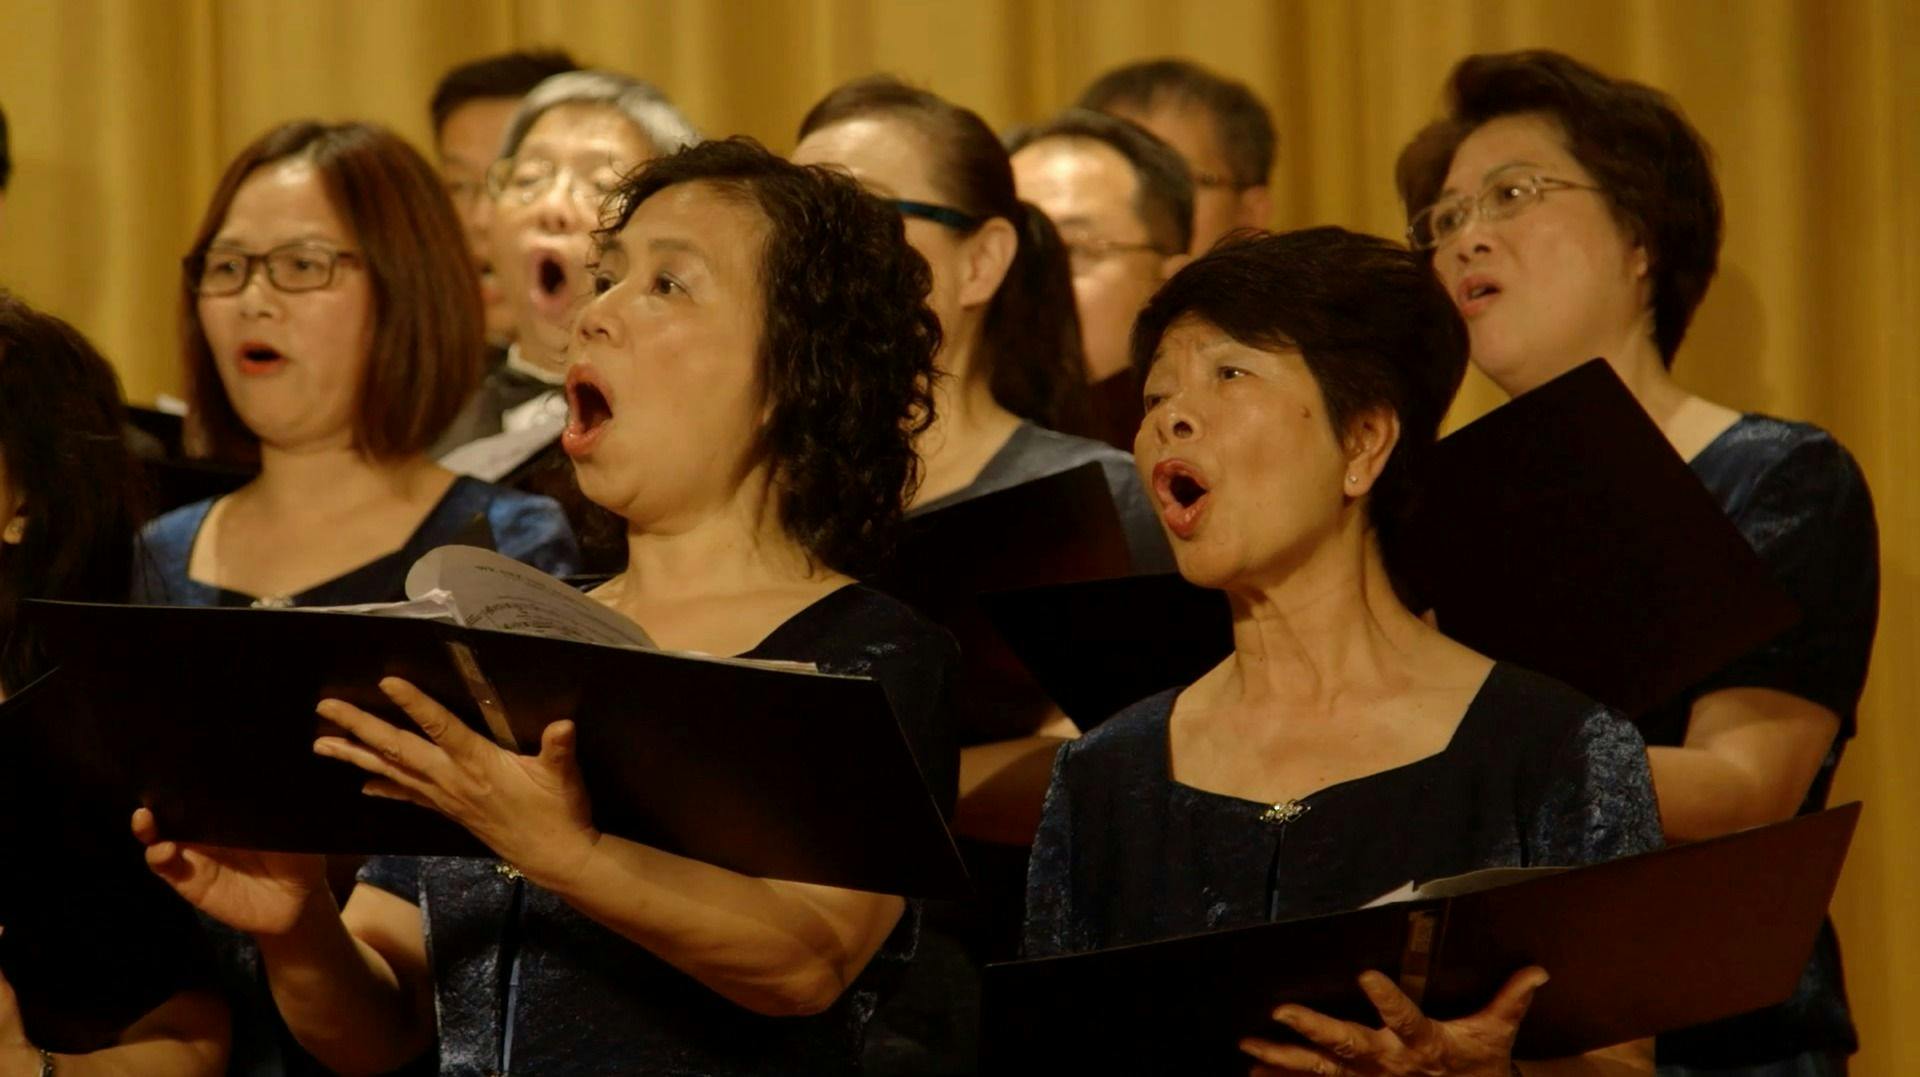 A close up image of people in Beijing, China singing in a choir